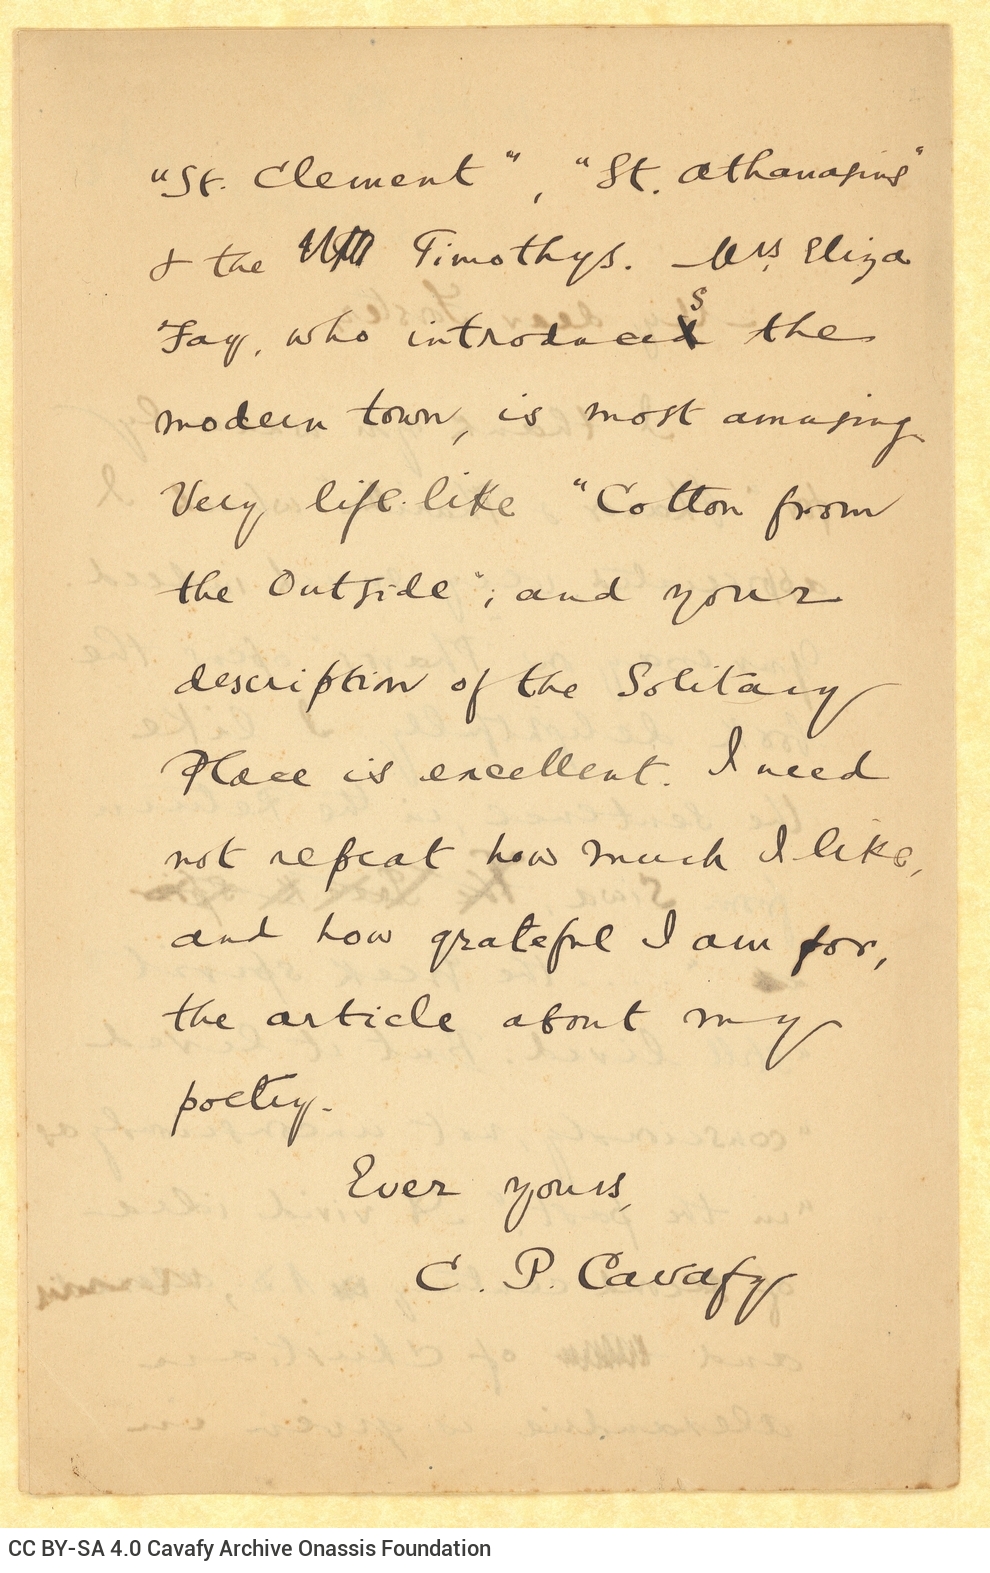 Handwritten copy of a letter by Cavafy to E. M. Forster on the first two pages of a bifolio. Cavafy's positive comments on Fo